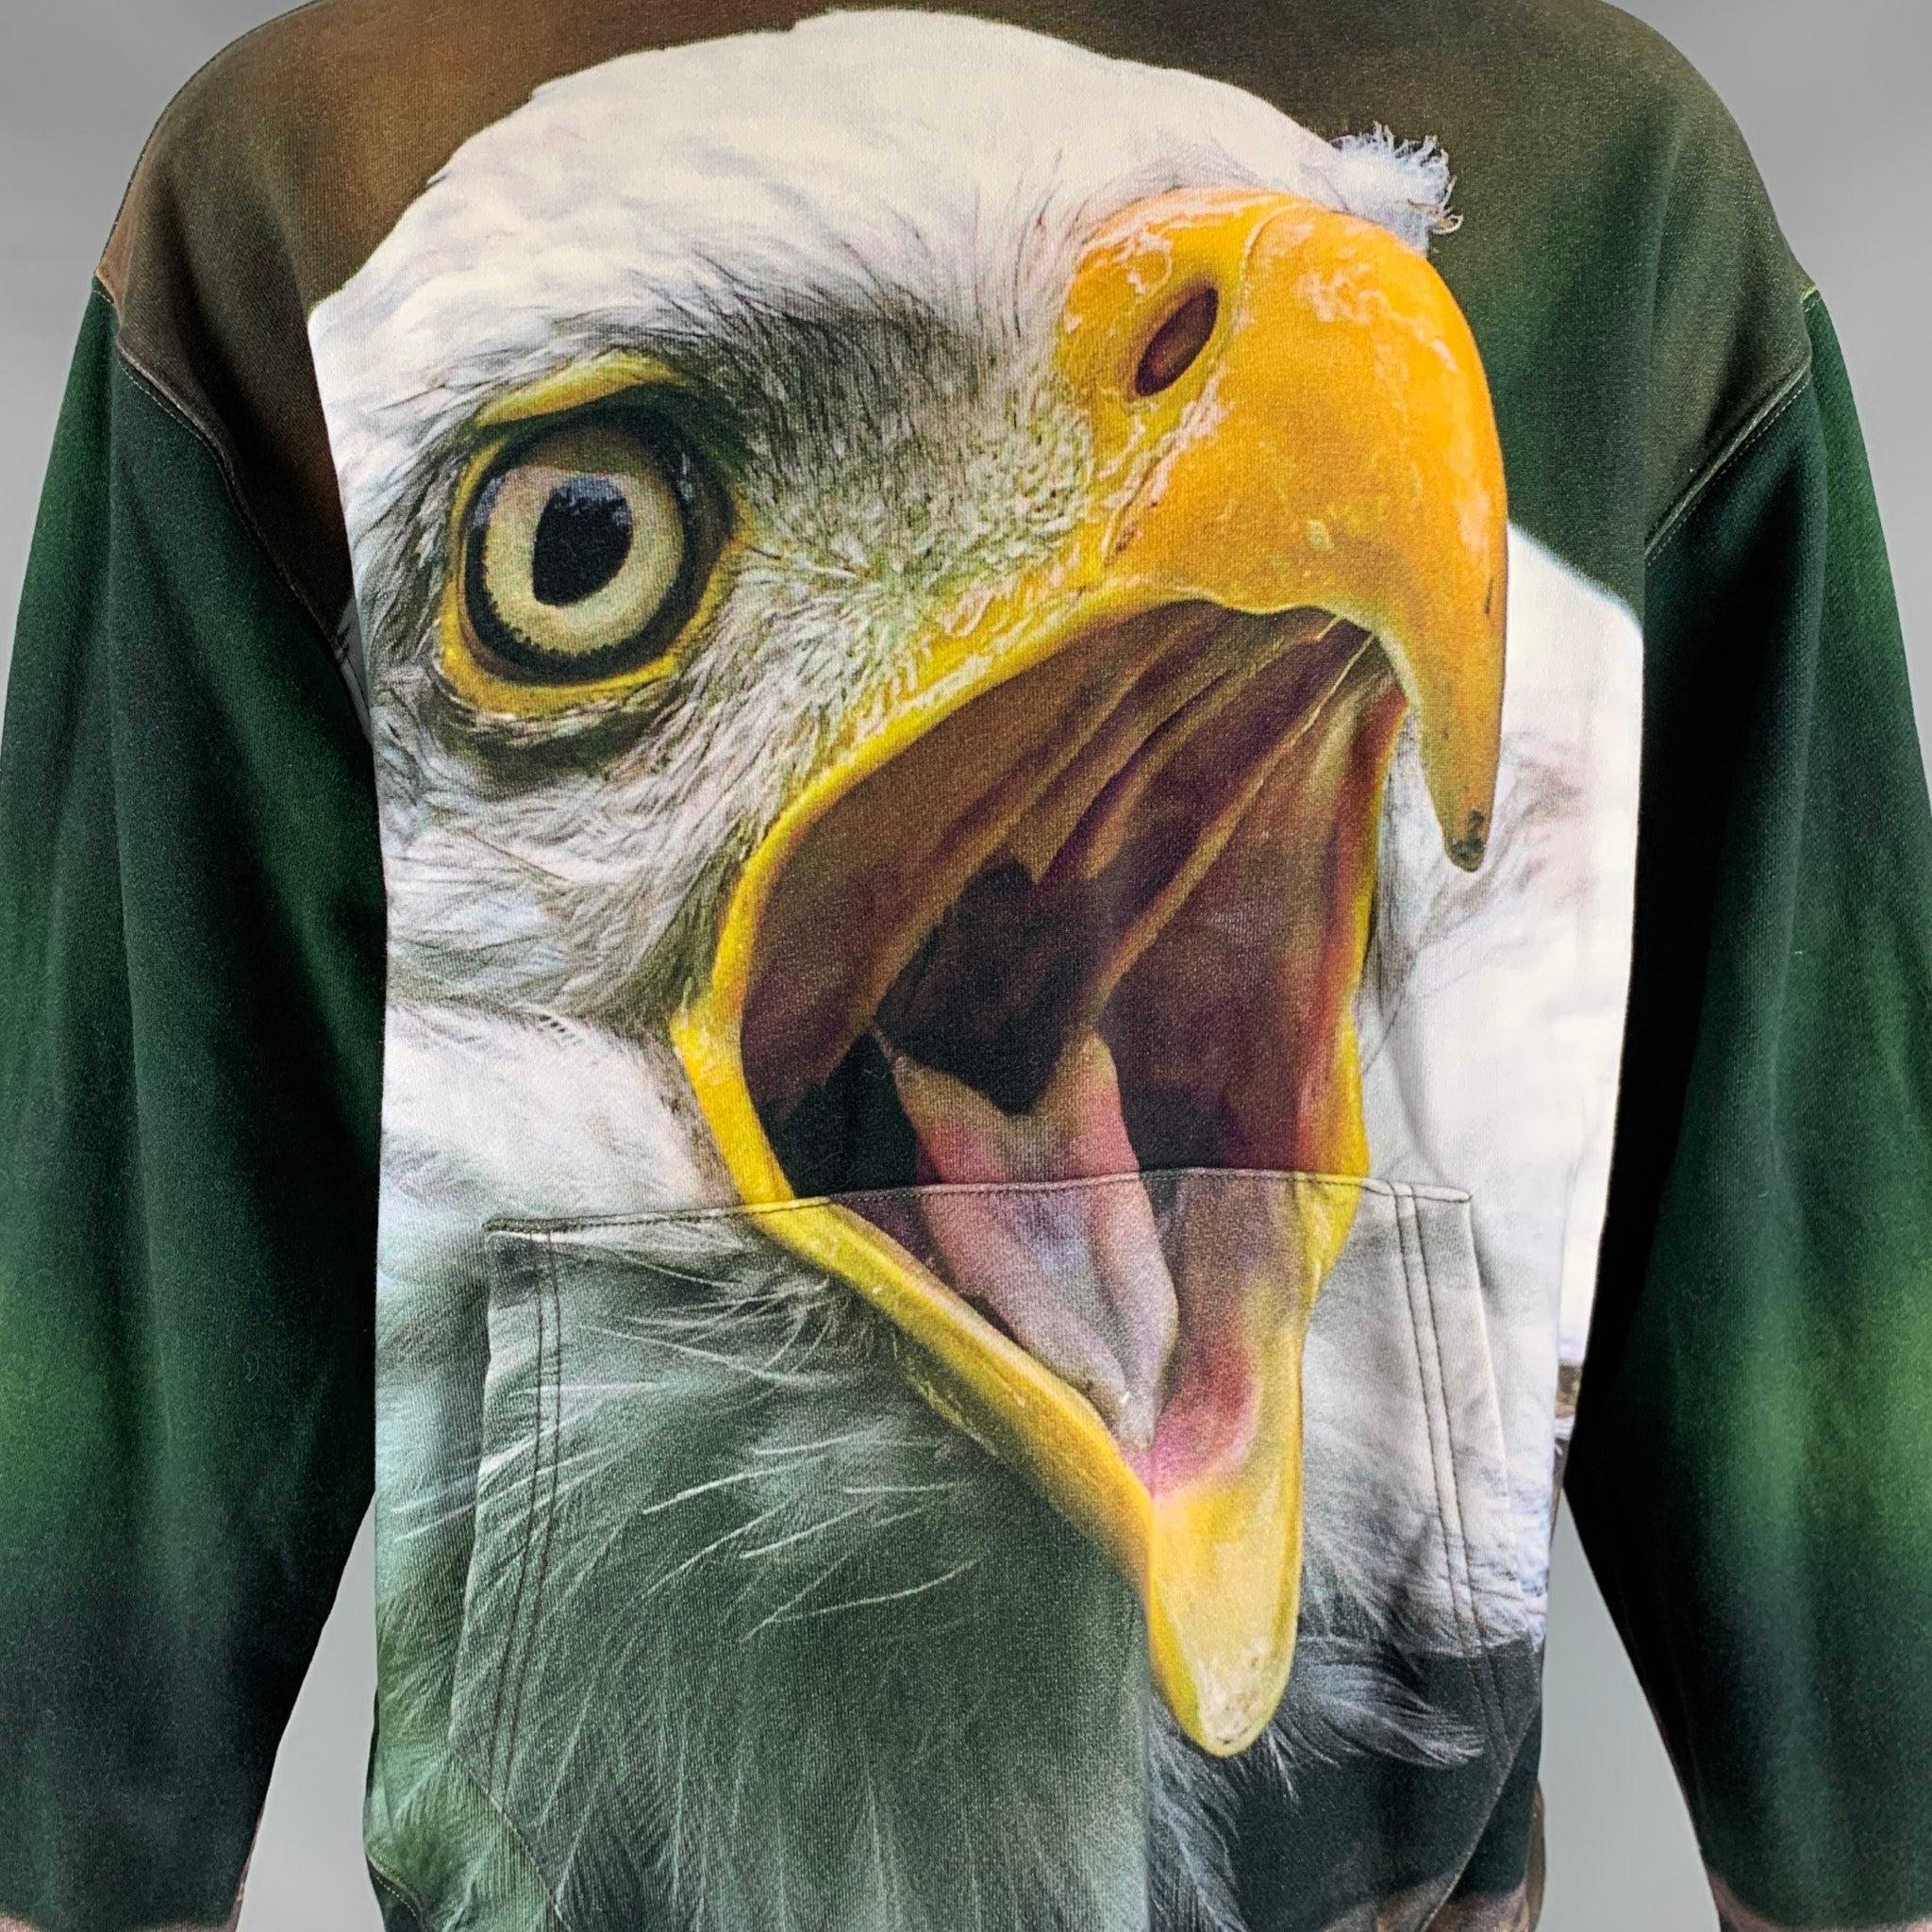 R13 sweatshirt
in a
green cotton fabric featuring oversized fit, eagle print, hooded style, and kangaroo pockets.Very Good Pre-Owned Condition. Missing hood drawstring. 

Marked:   S 

Measurements: 
 
Shoulder: 24 inches Chest: 50 inches Sleeve: